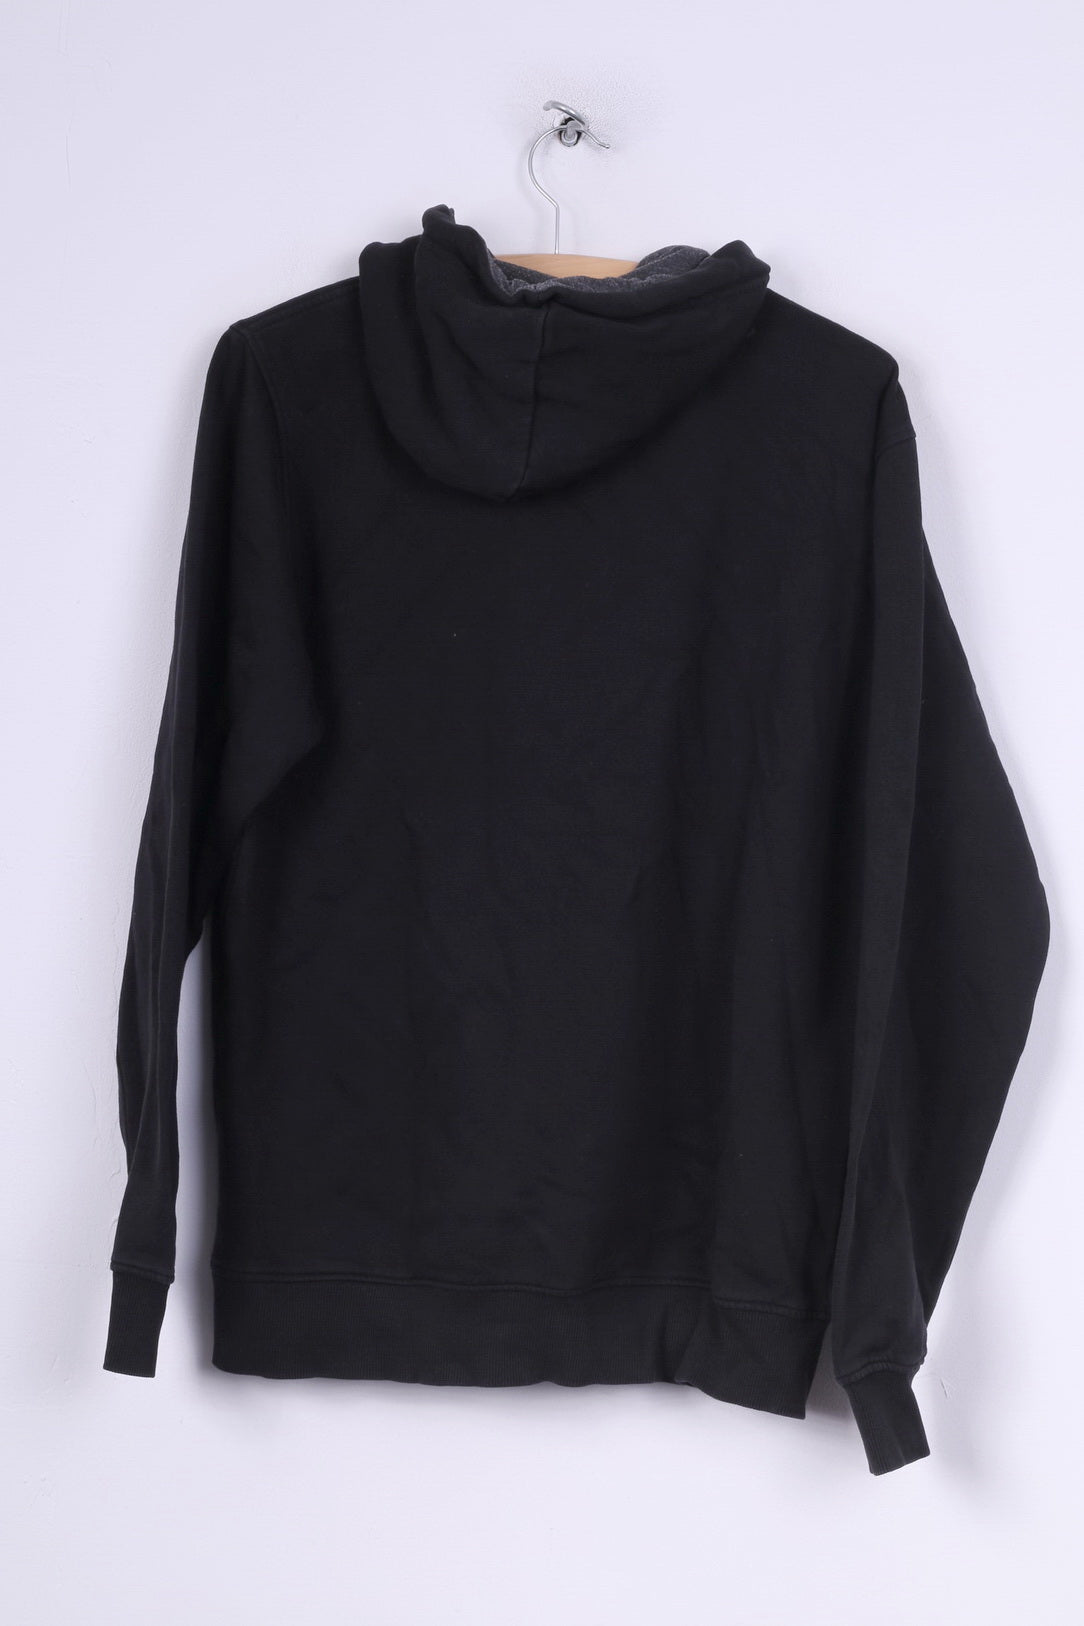 Much More Mens M Sweatshirt Black Hooded Graphic NYC Brooklyn Cotton Jumper